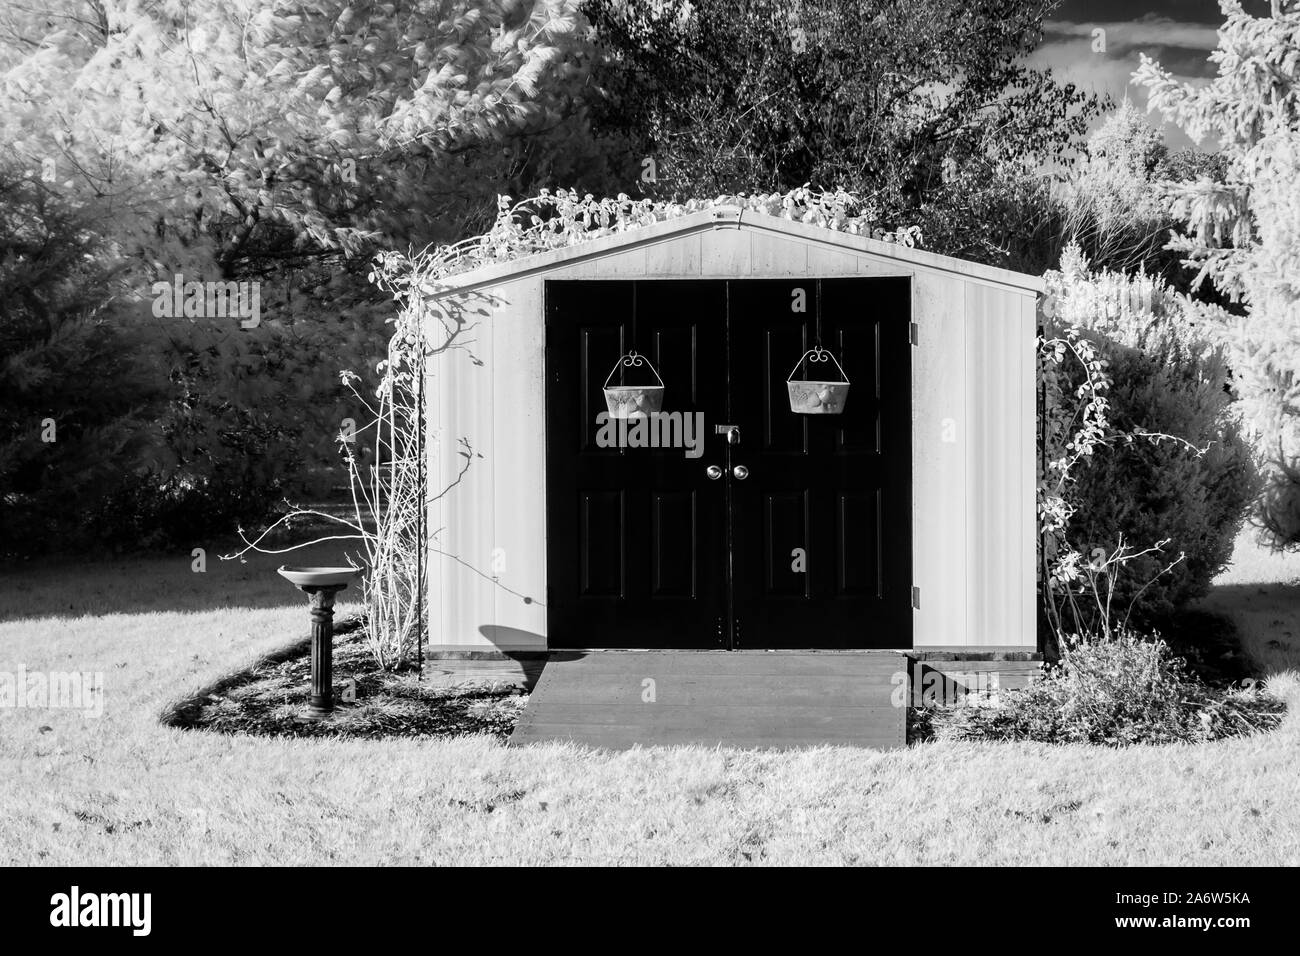 Infrared black and white view of a shed in a rural backyard in the countryside. Stock Photo